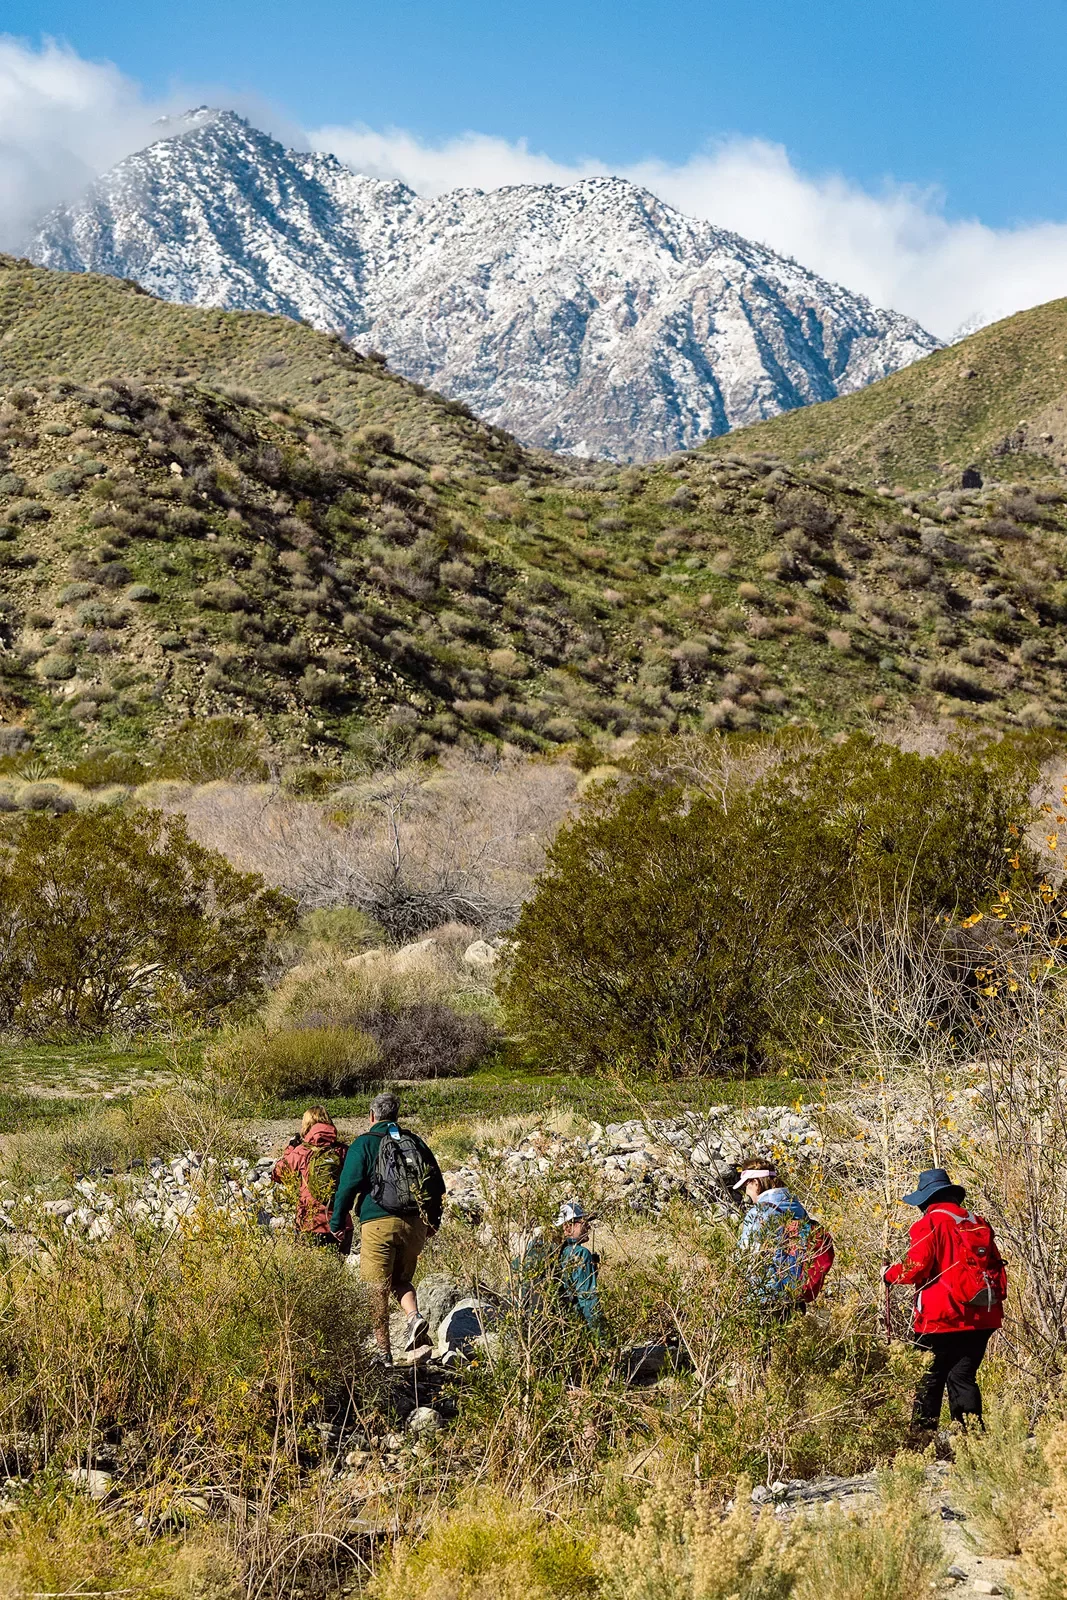 Guests hiking in desert, snowy mountain far in background.